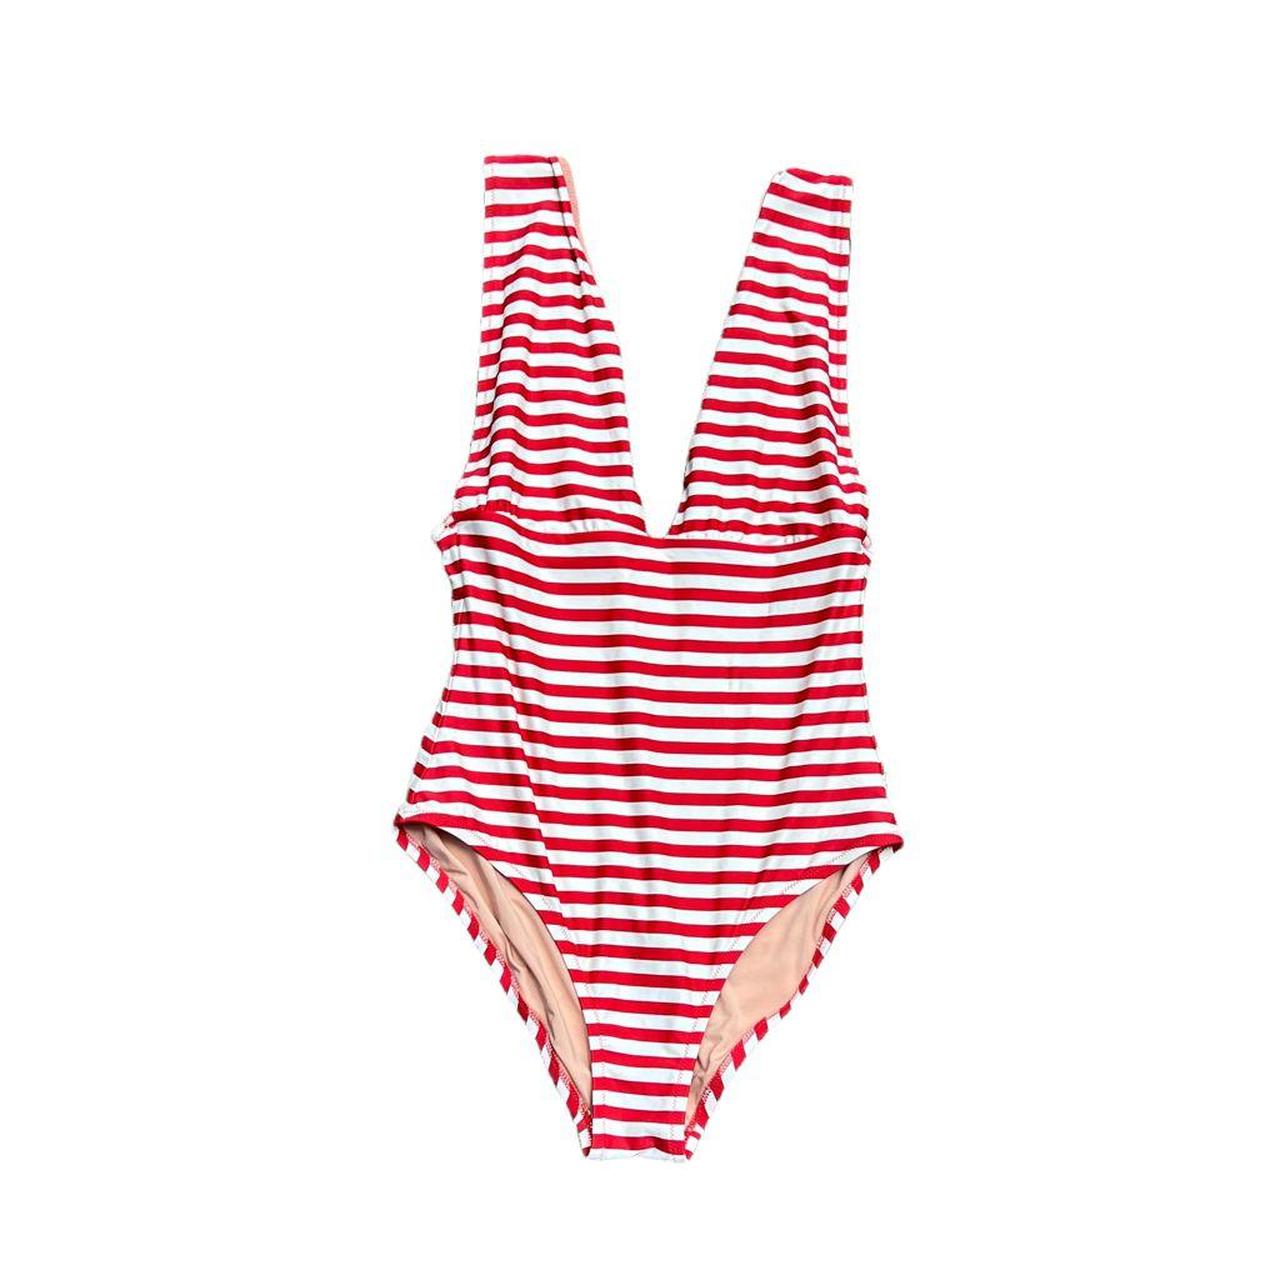 JCREW Red & White Plunging One Piece Swimsuit Size... - Depop